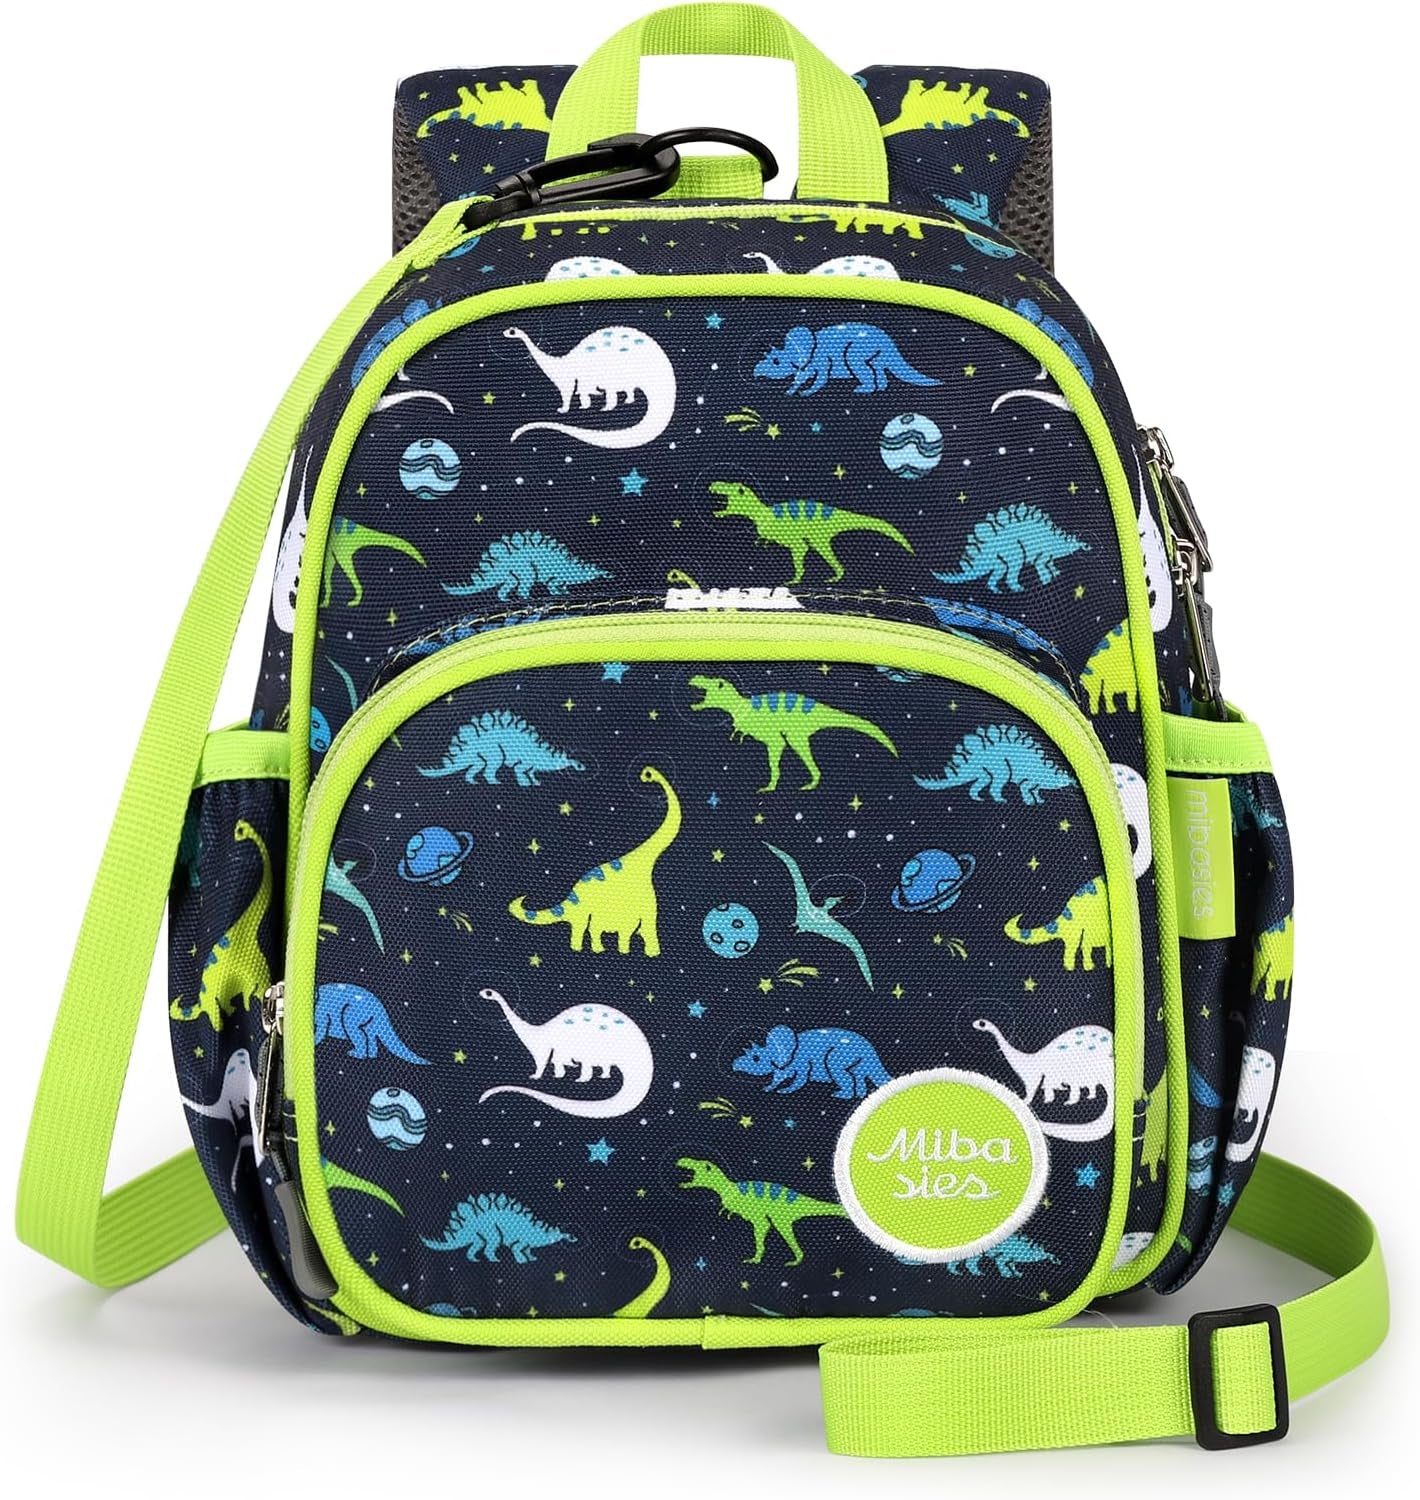 Backpack Leash for Toddlers 1-3: Baby Backpack for Boys with Anti-Lost Harness - Dinosaur